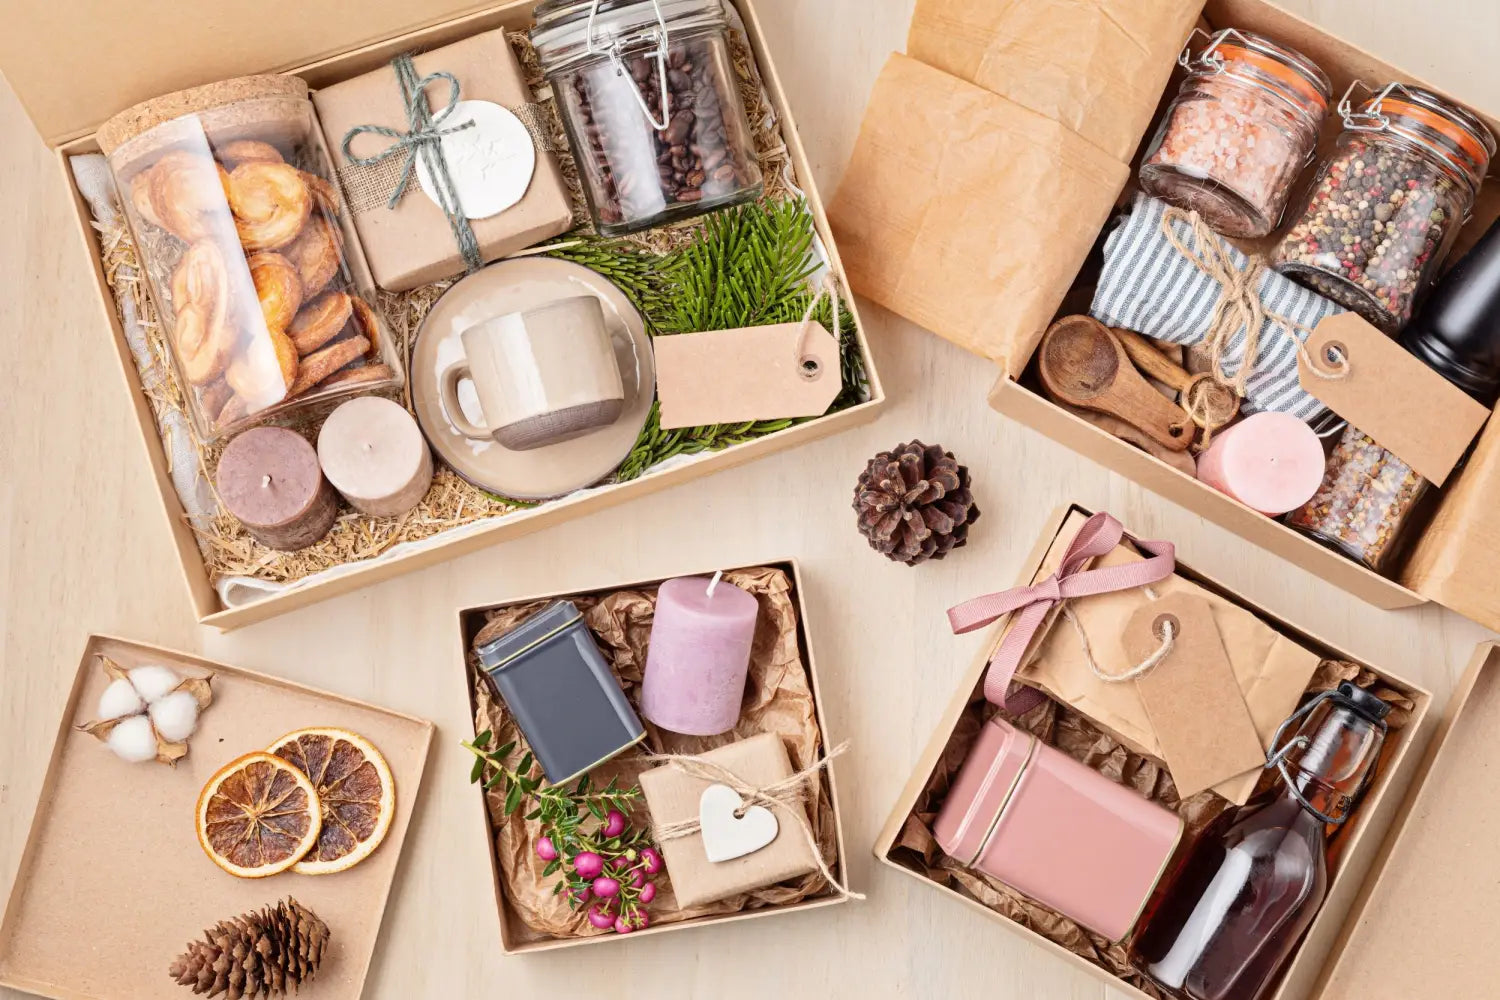 7 Reasons Why Personalized Gifts Are the Best!